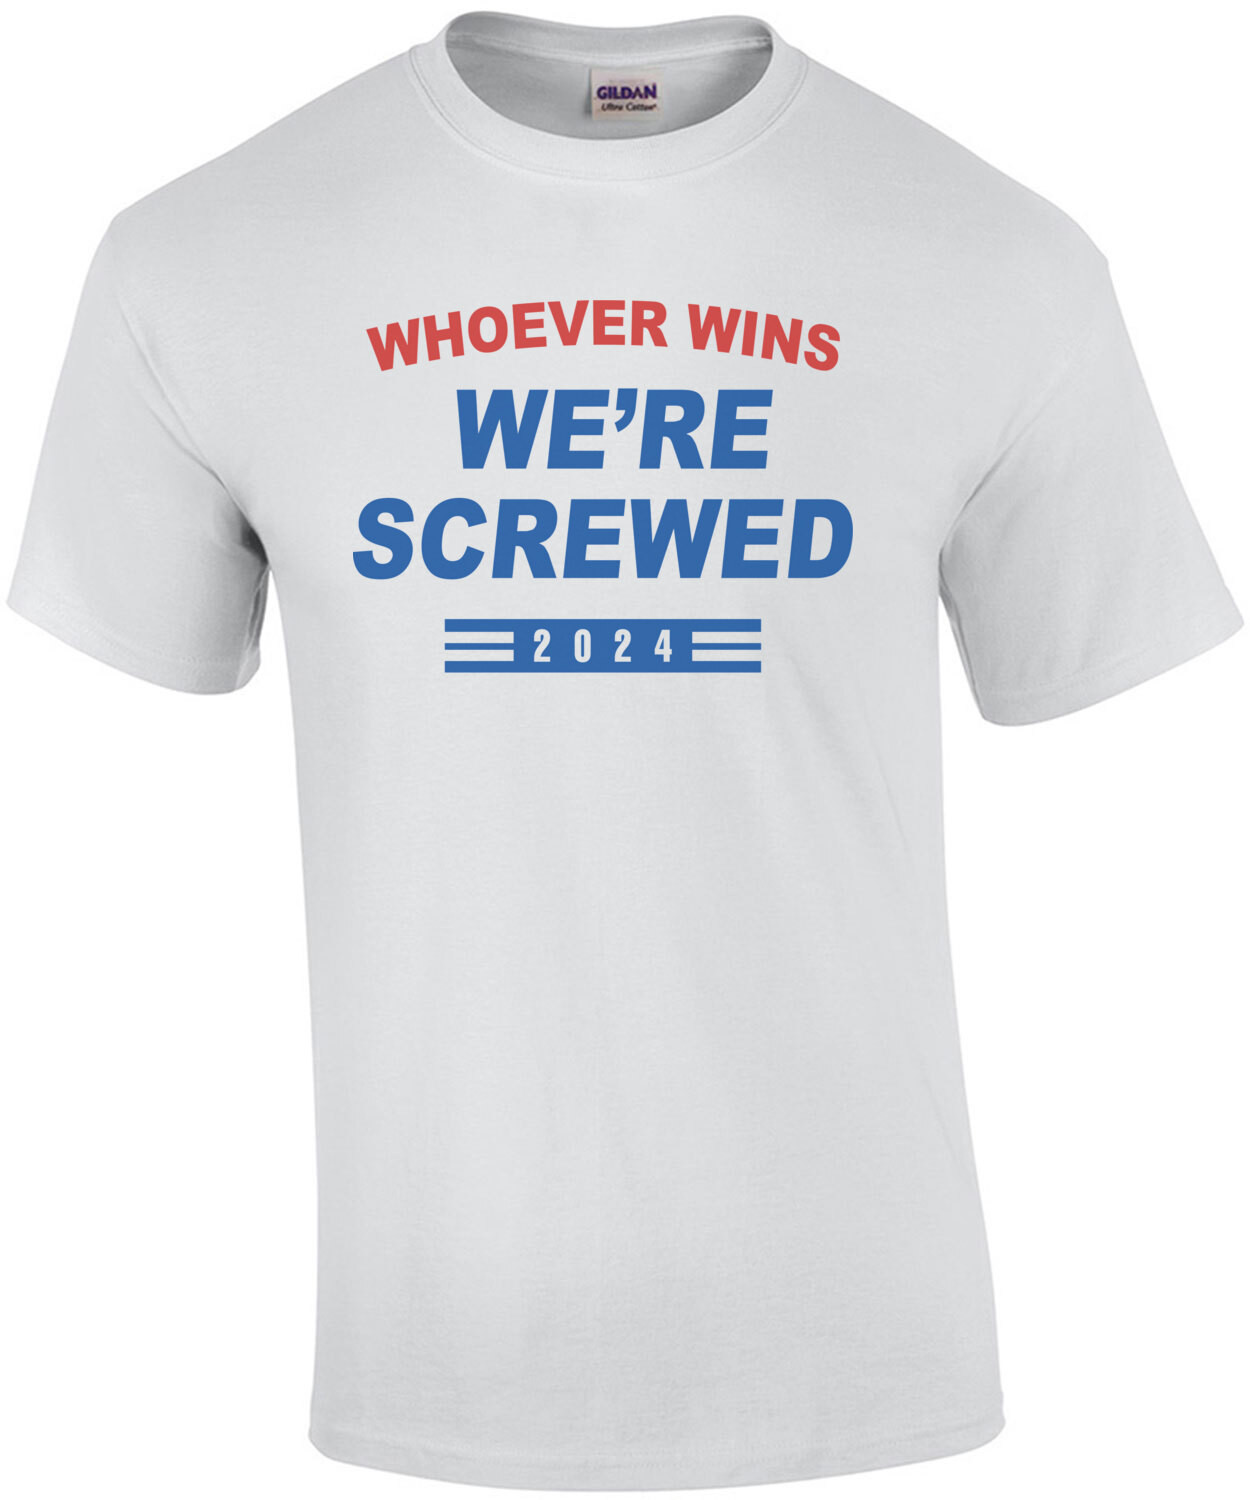 Whoever Wins We're Screwed - Funny 2024 Election T-Shirt